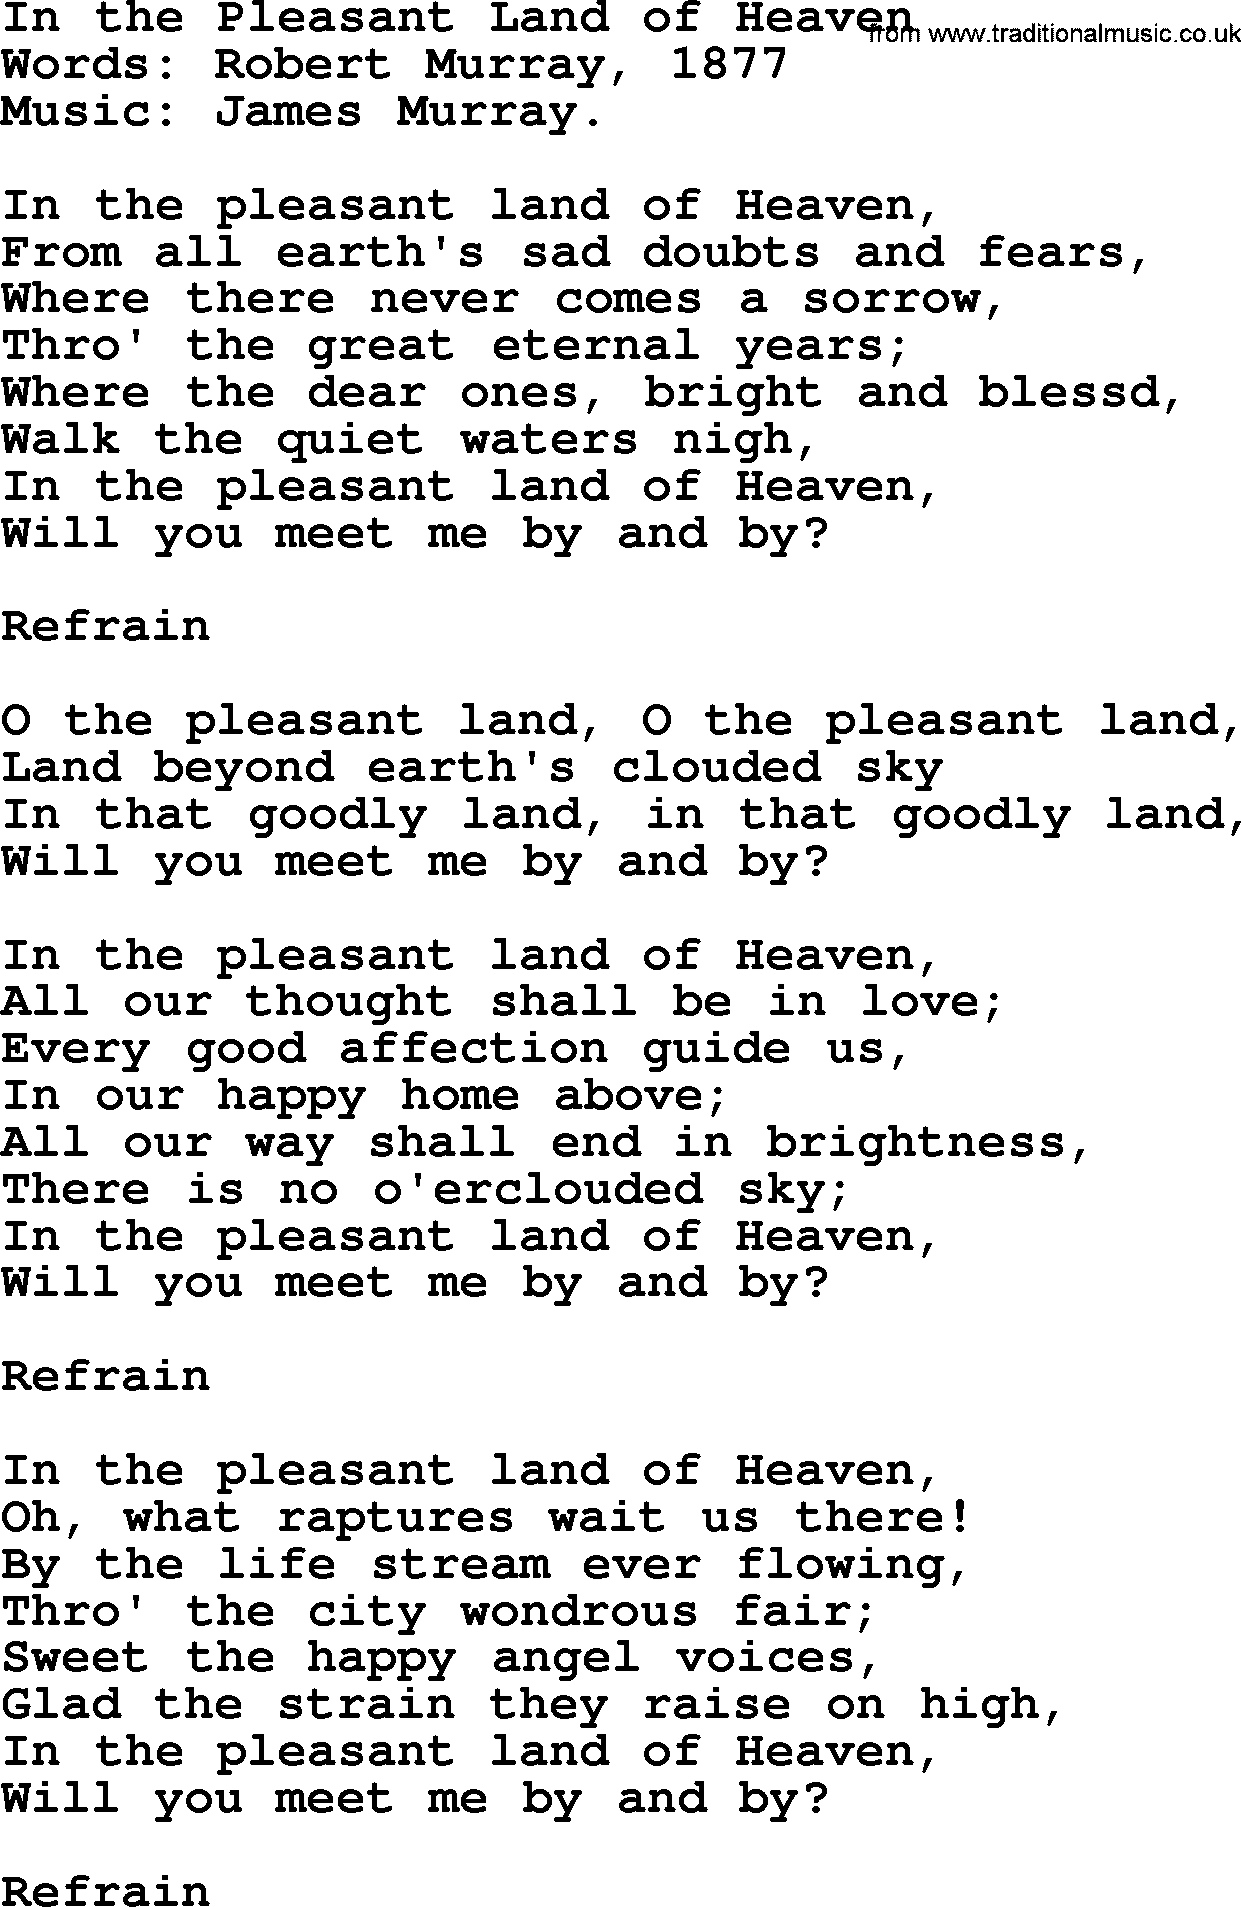 Songs and Hymns about Heaven: In The Pleasant Land Of Heaven lyrics with PDF